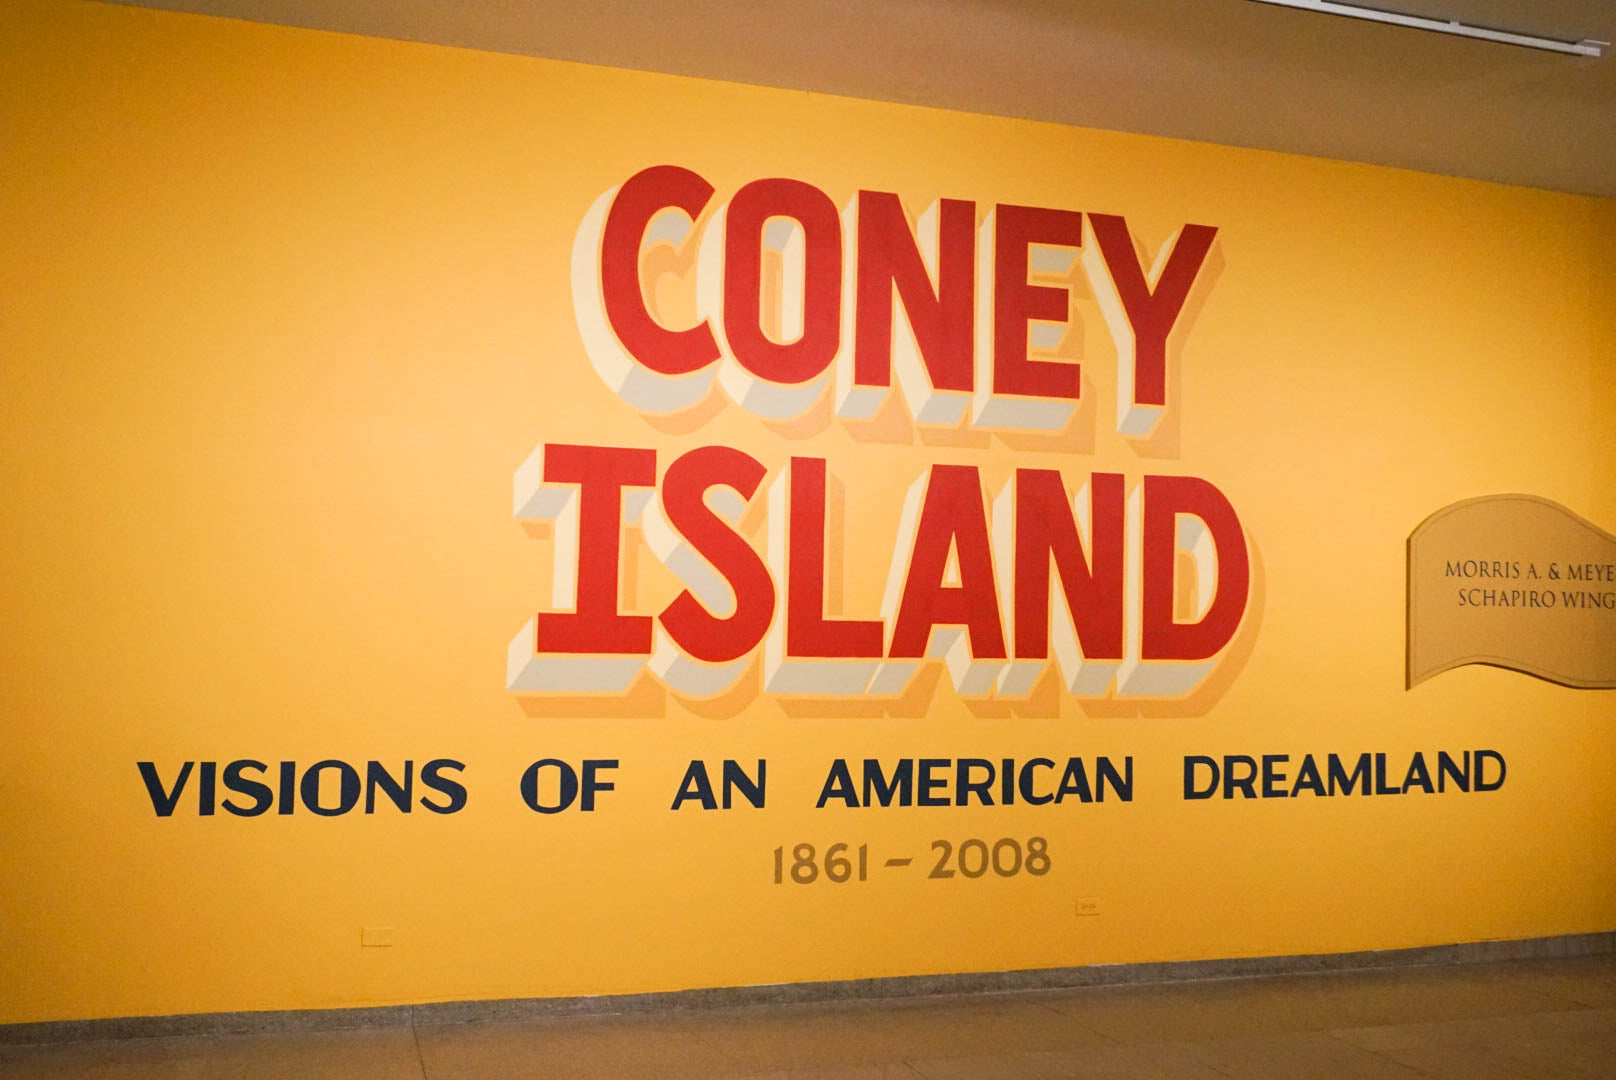 Stephen Powers: Coney Island Is Still Dreamland (To a Seagull)